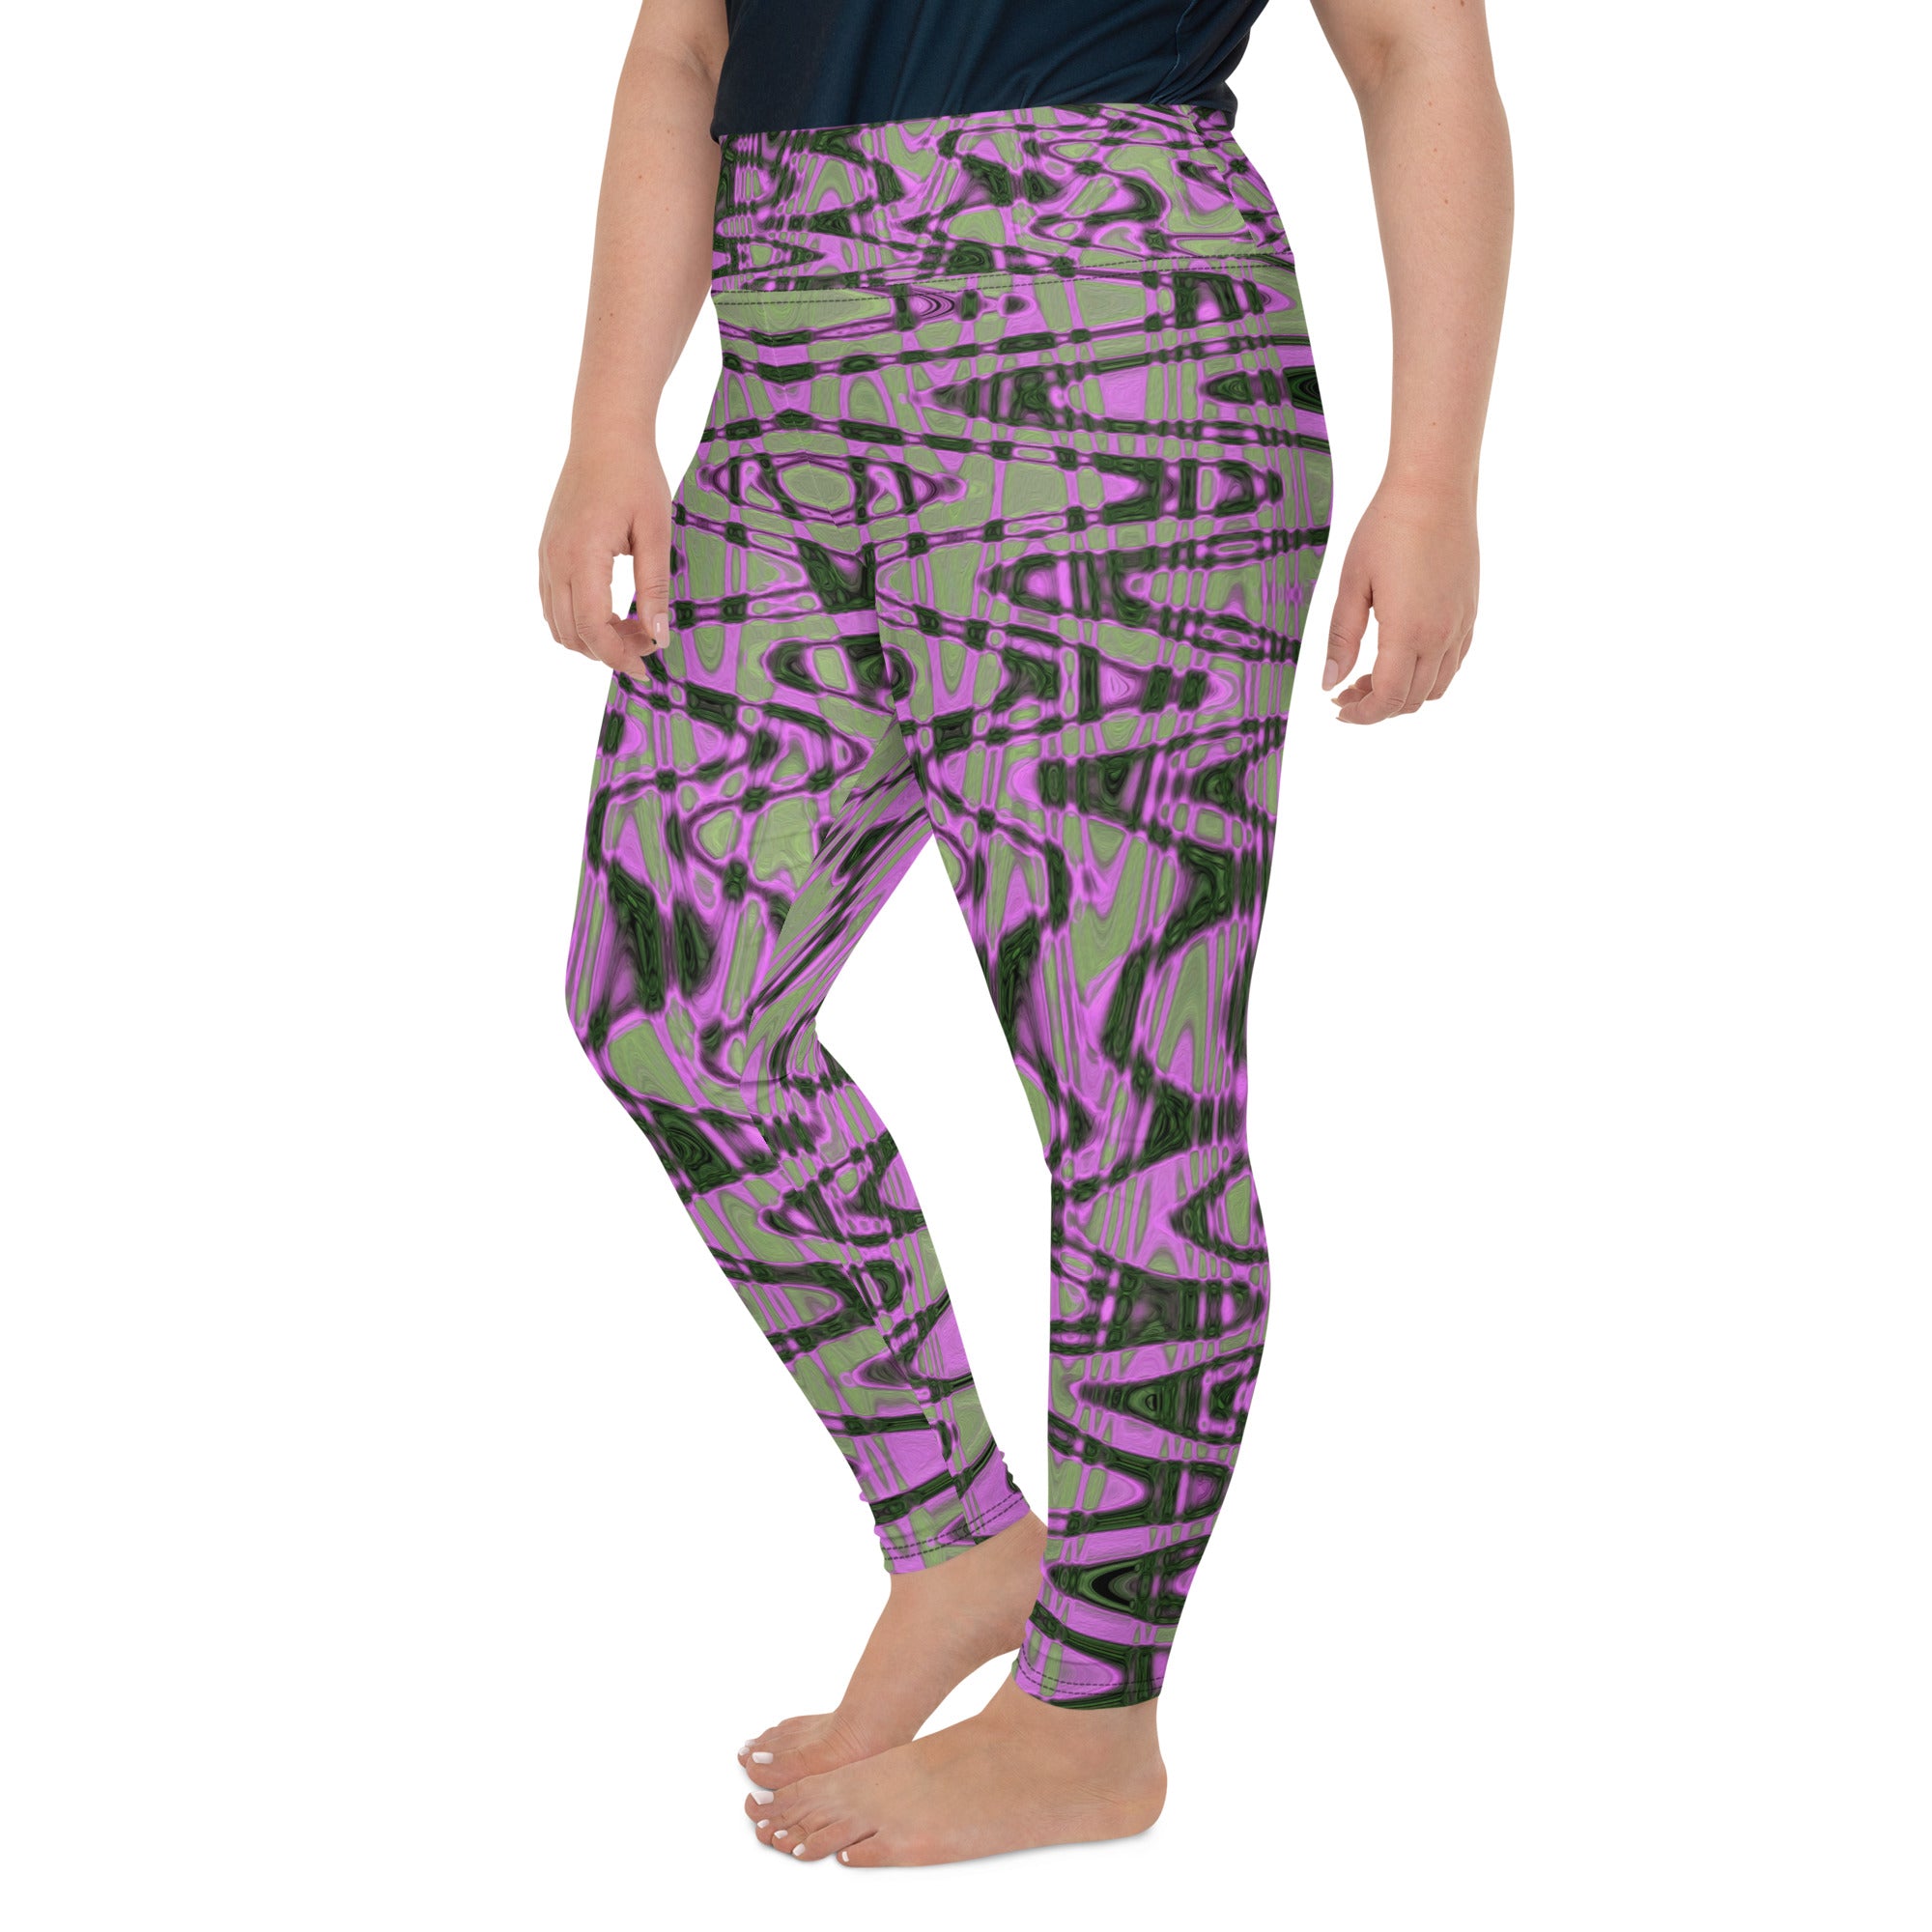 Plus Size Leggings | Cool Green and Pink Abstract Tie Dye Retro Waves